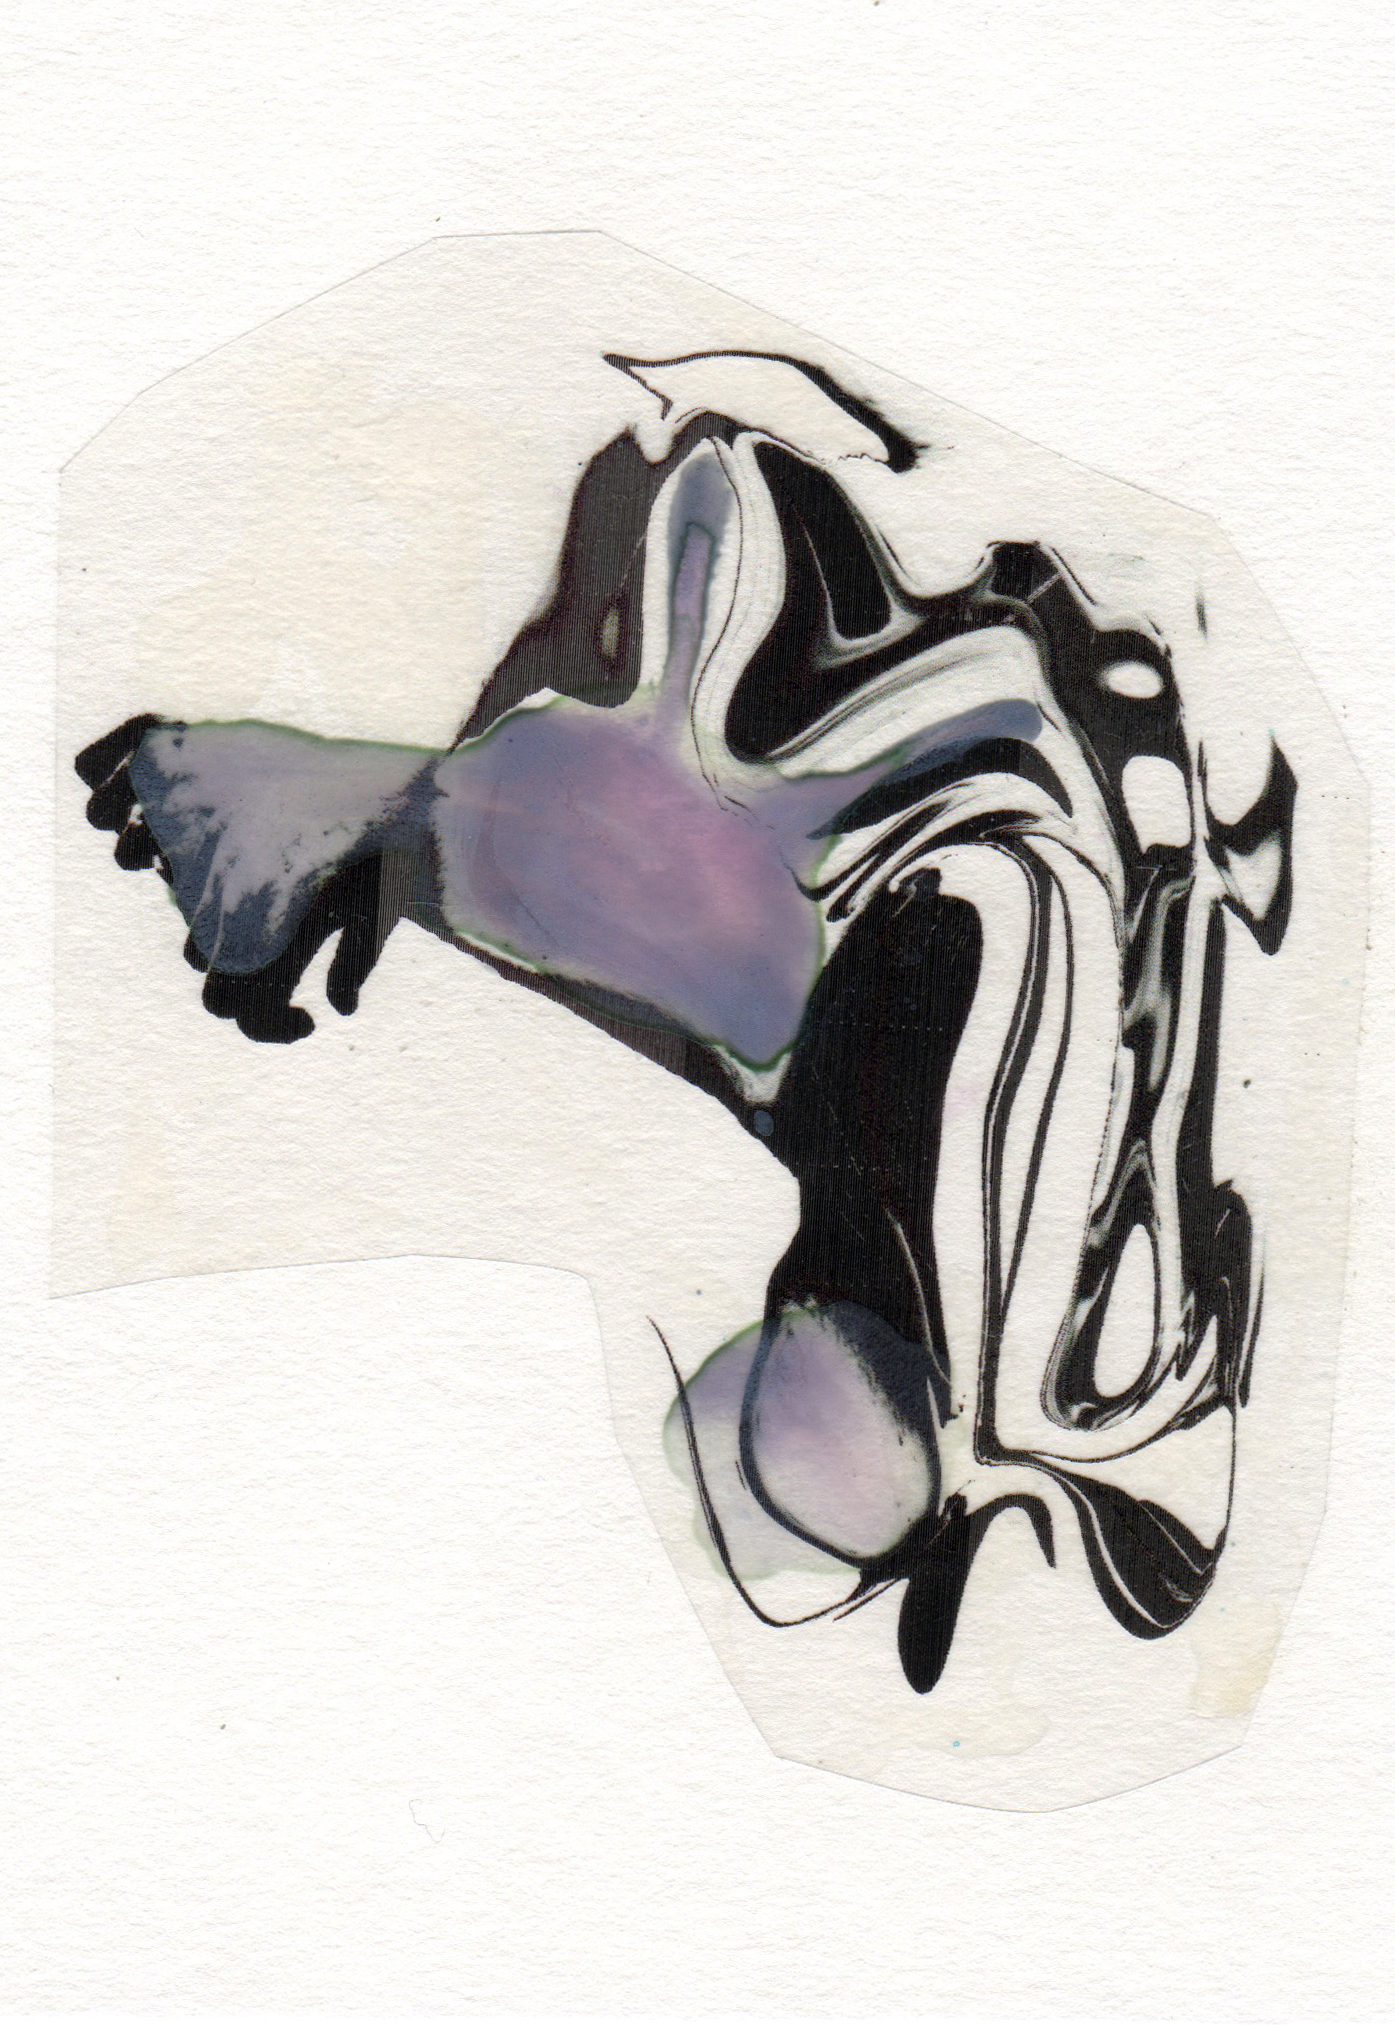 Paralyzer 2015 acrylic watercolor mylar archival ink and paper 5 x 7